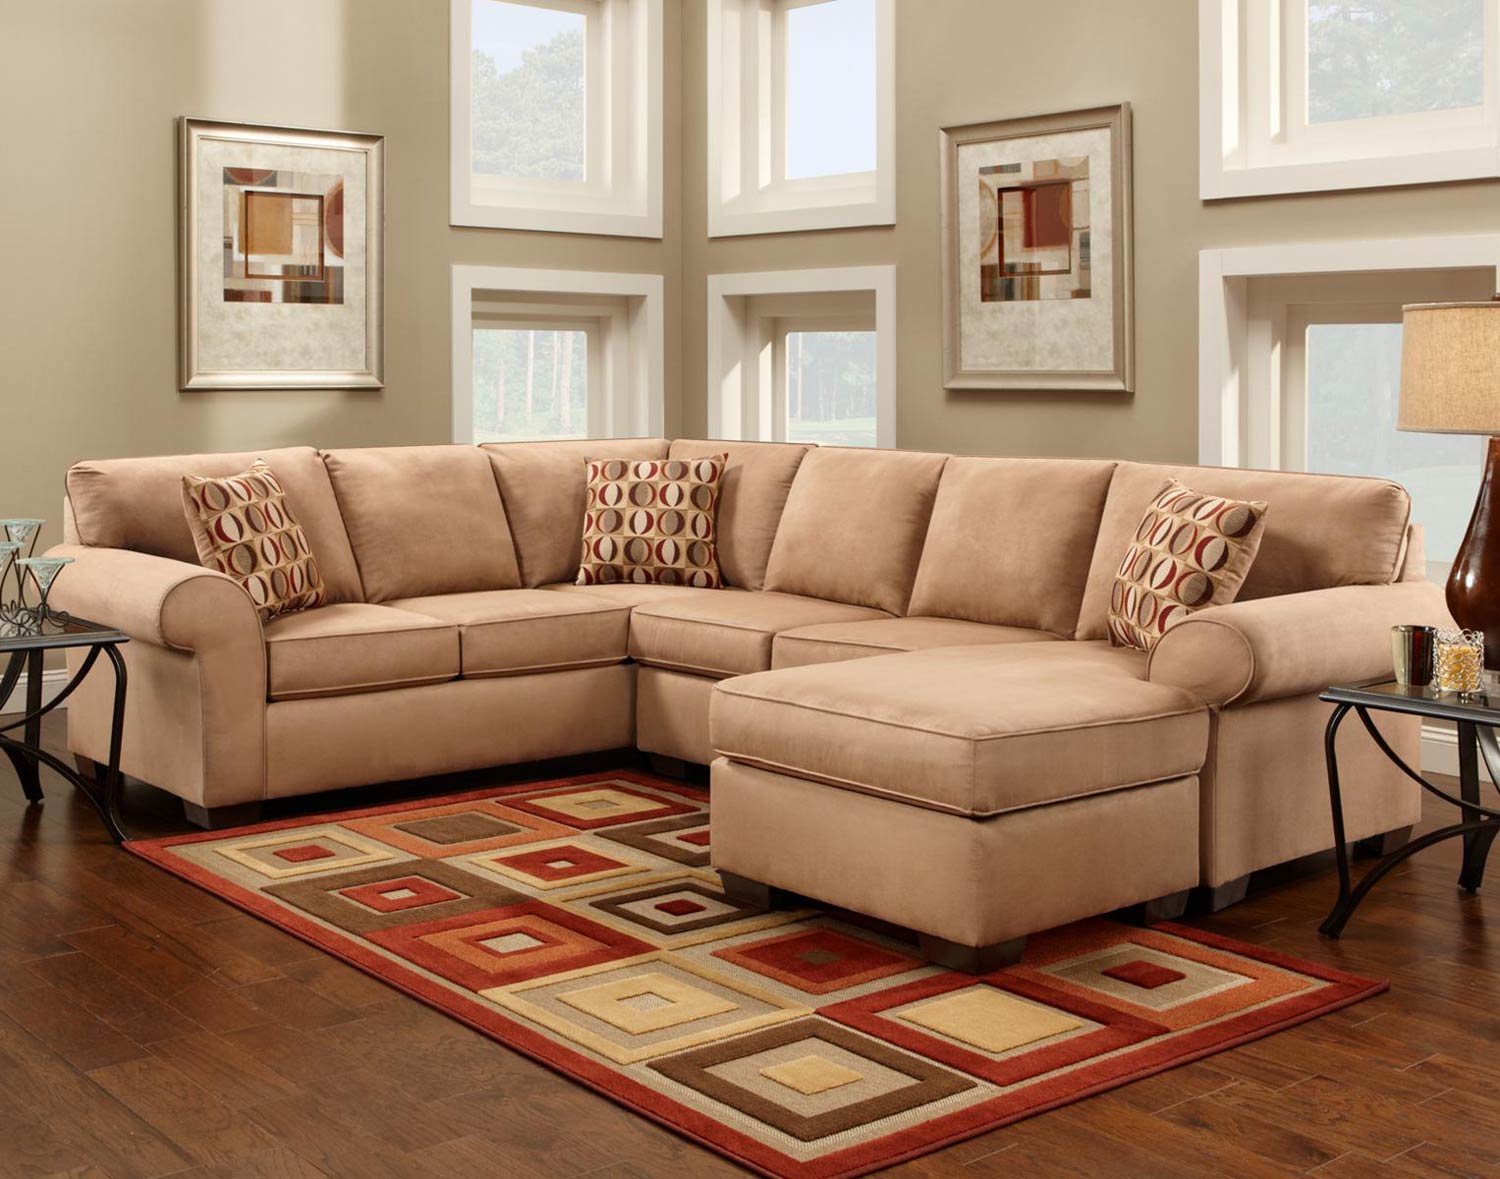 Chelsea Home Allegany 2 Piece Sectional Sofa with Full Sleeper - Patriot Mocha